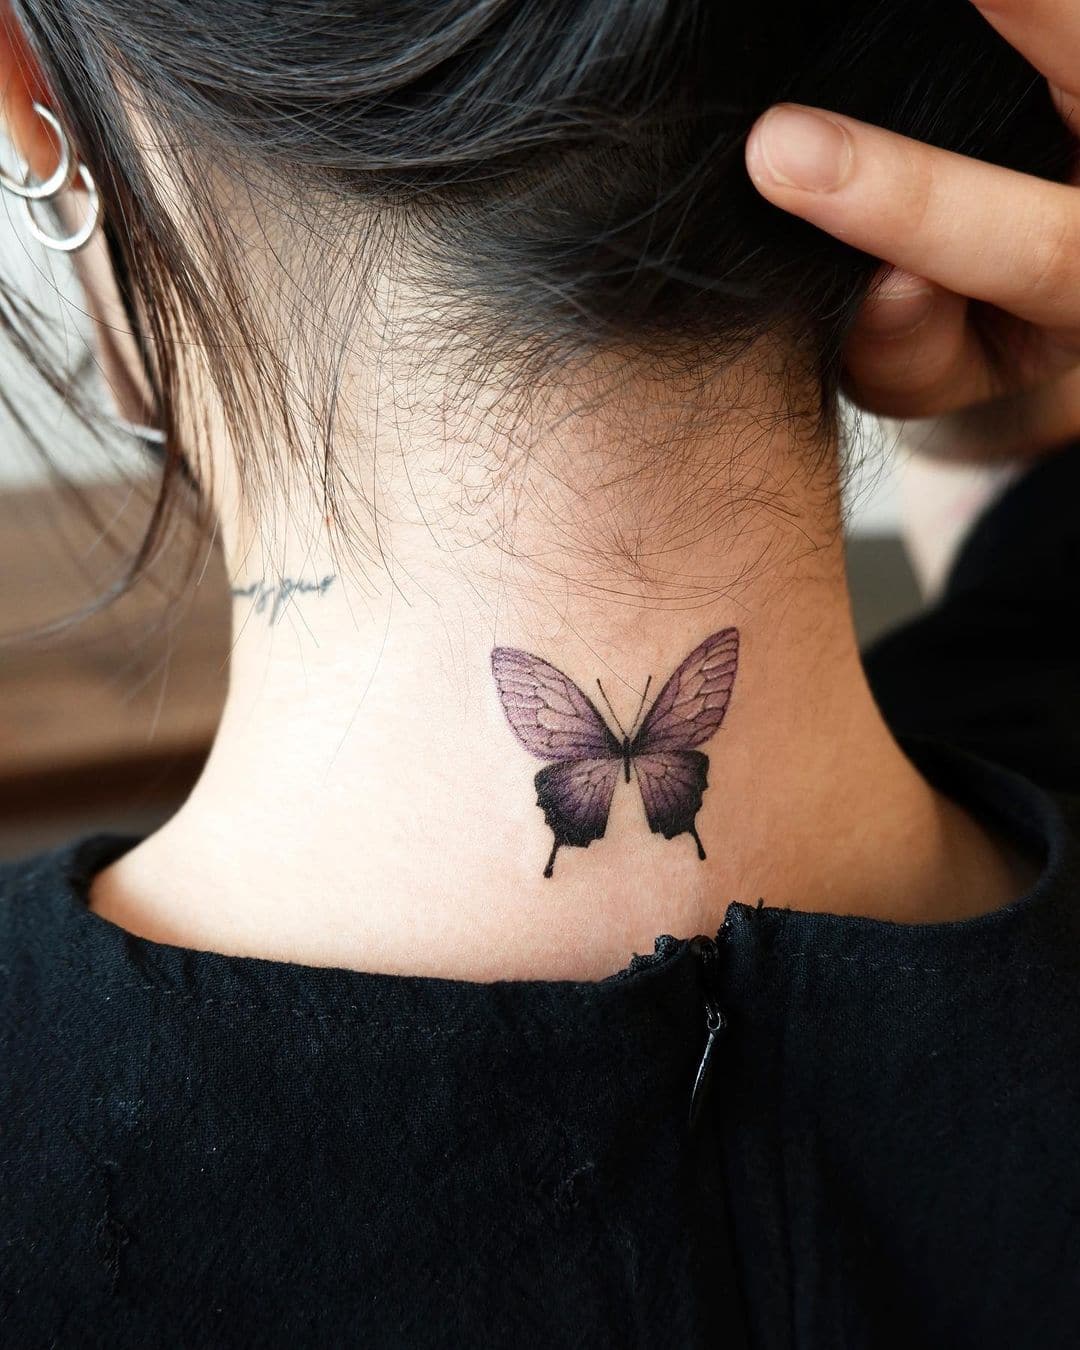 16 Pretty Back of the Neck Tattoos That Have Us Obsessed (PHOTOS) |  CafeMom.com